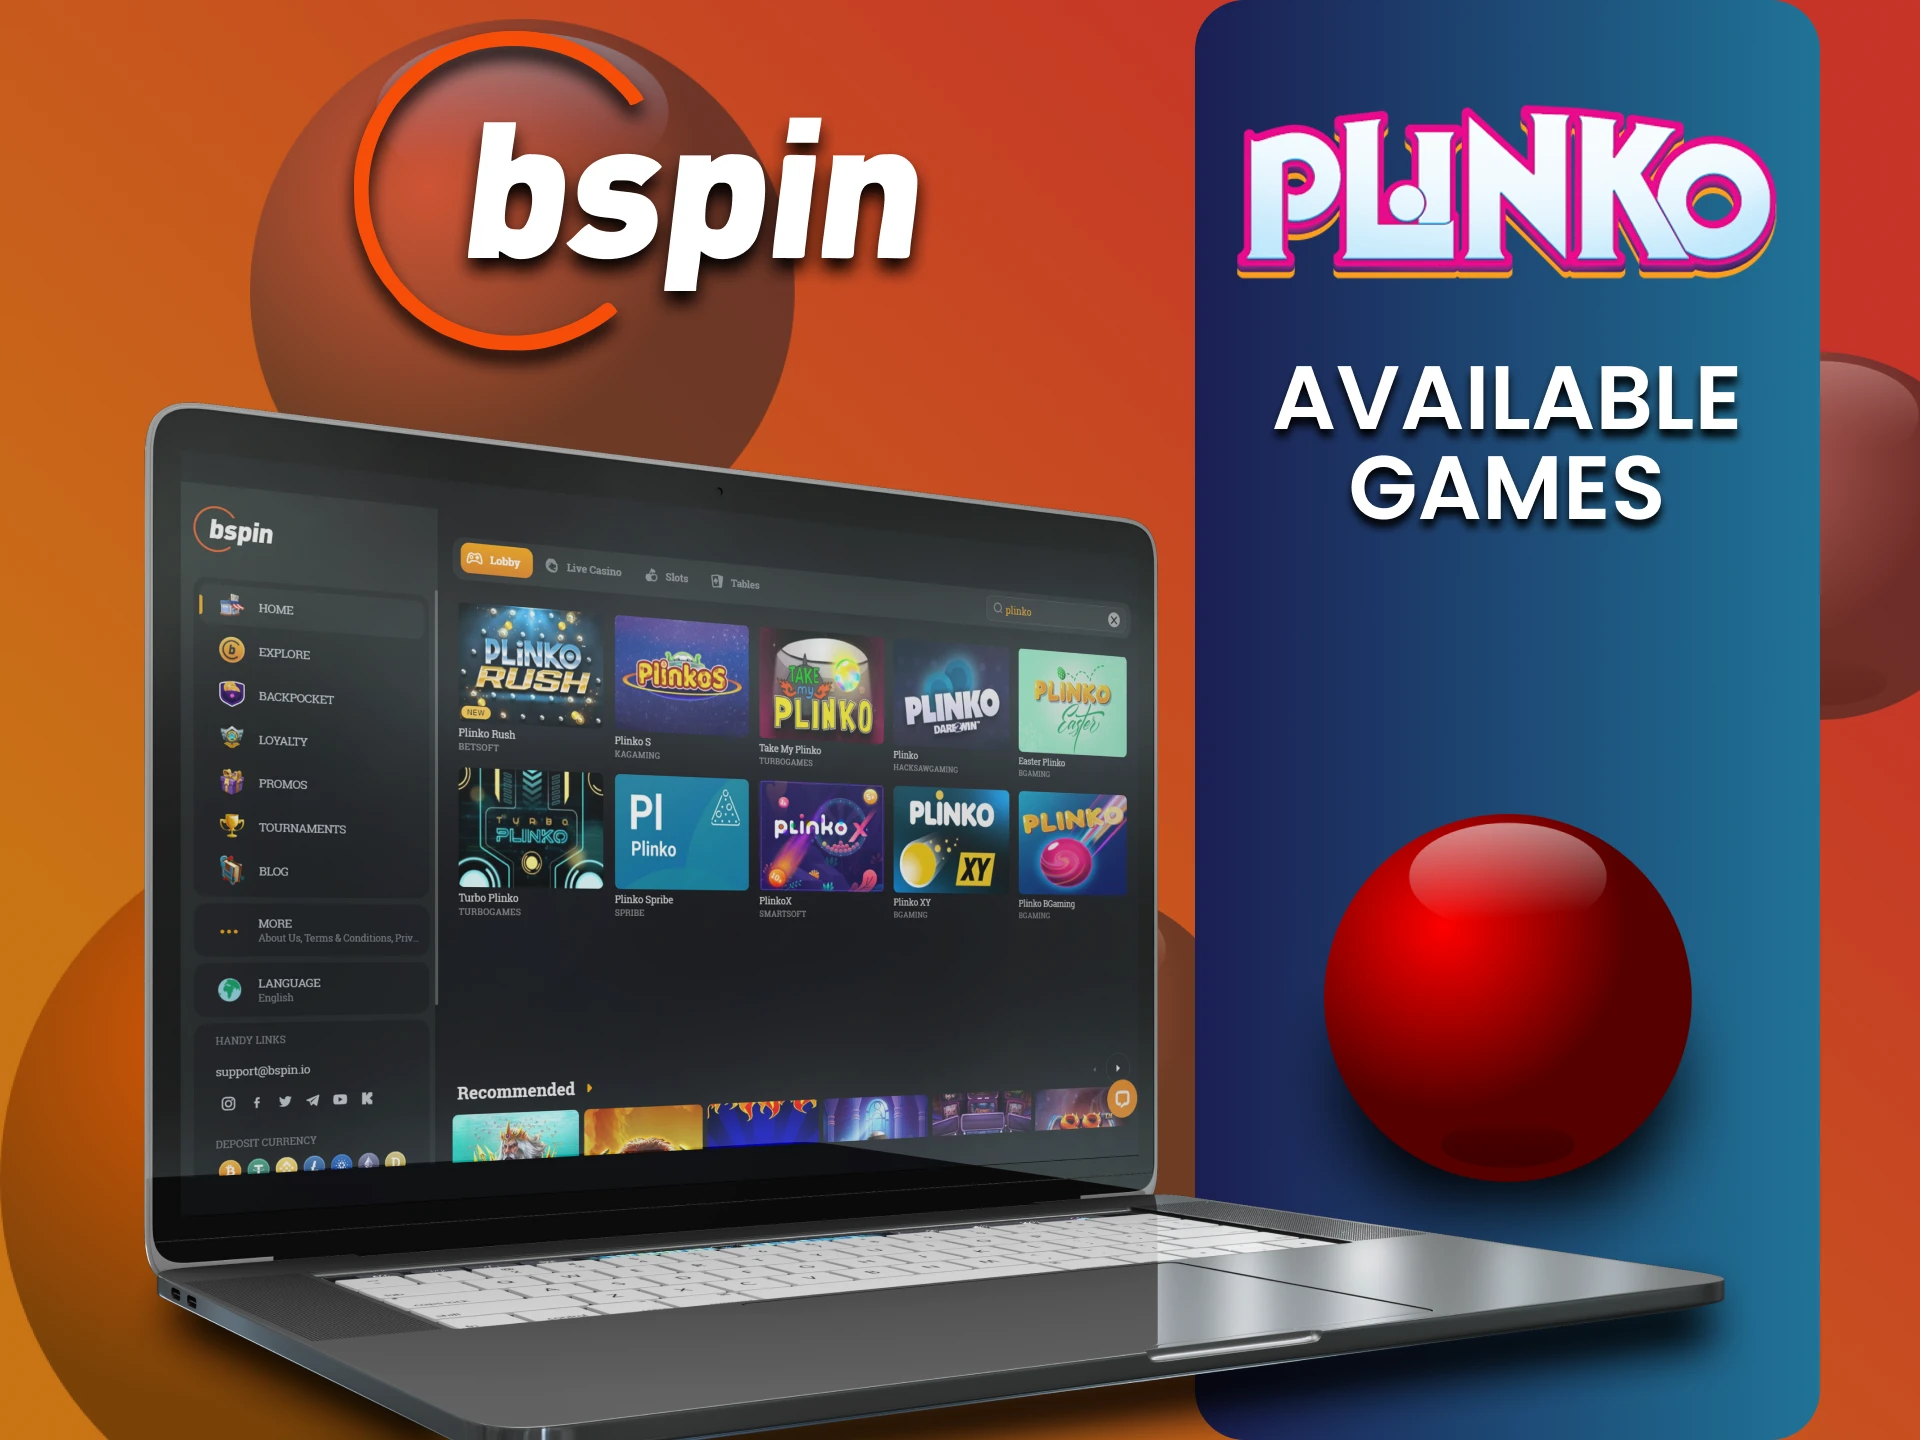 Choose your version of Plinko game on Bspin.